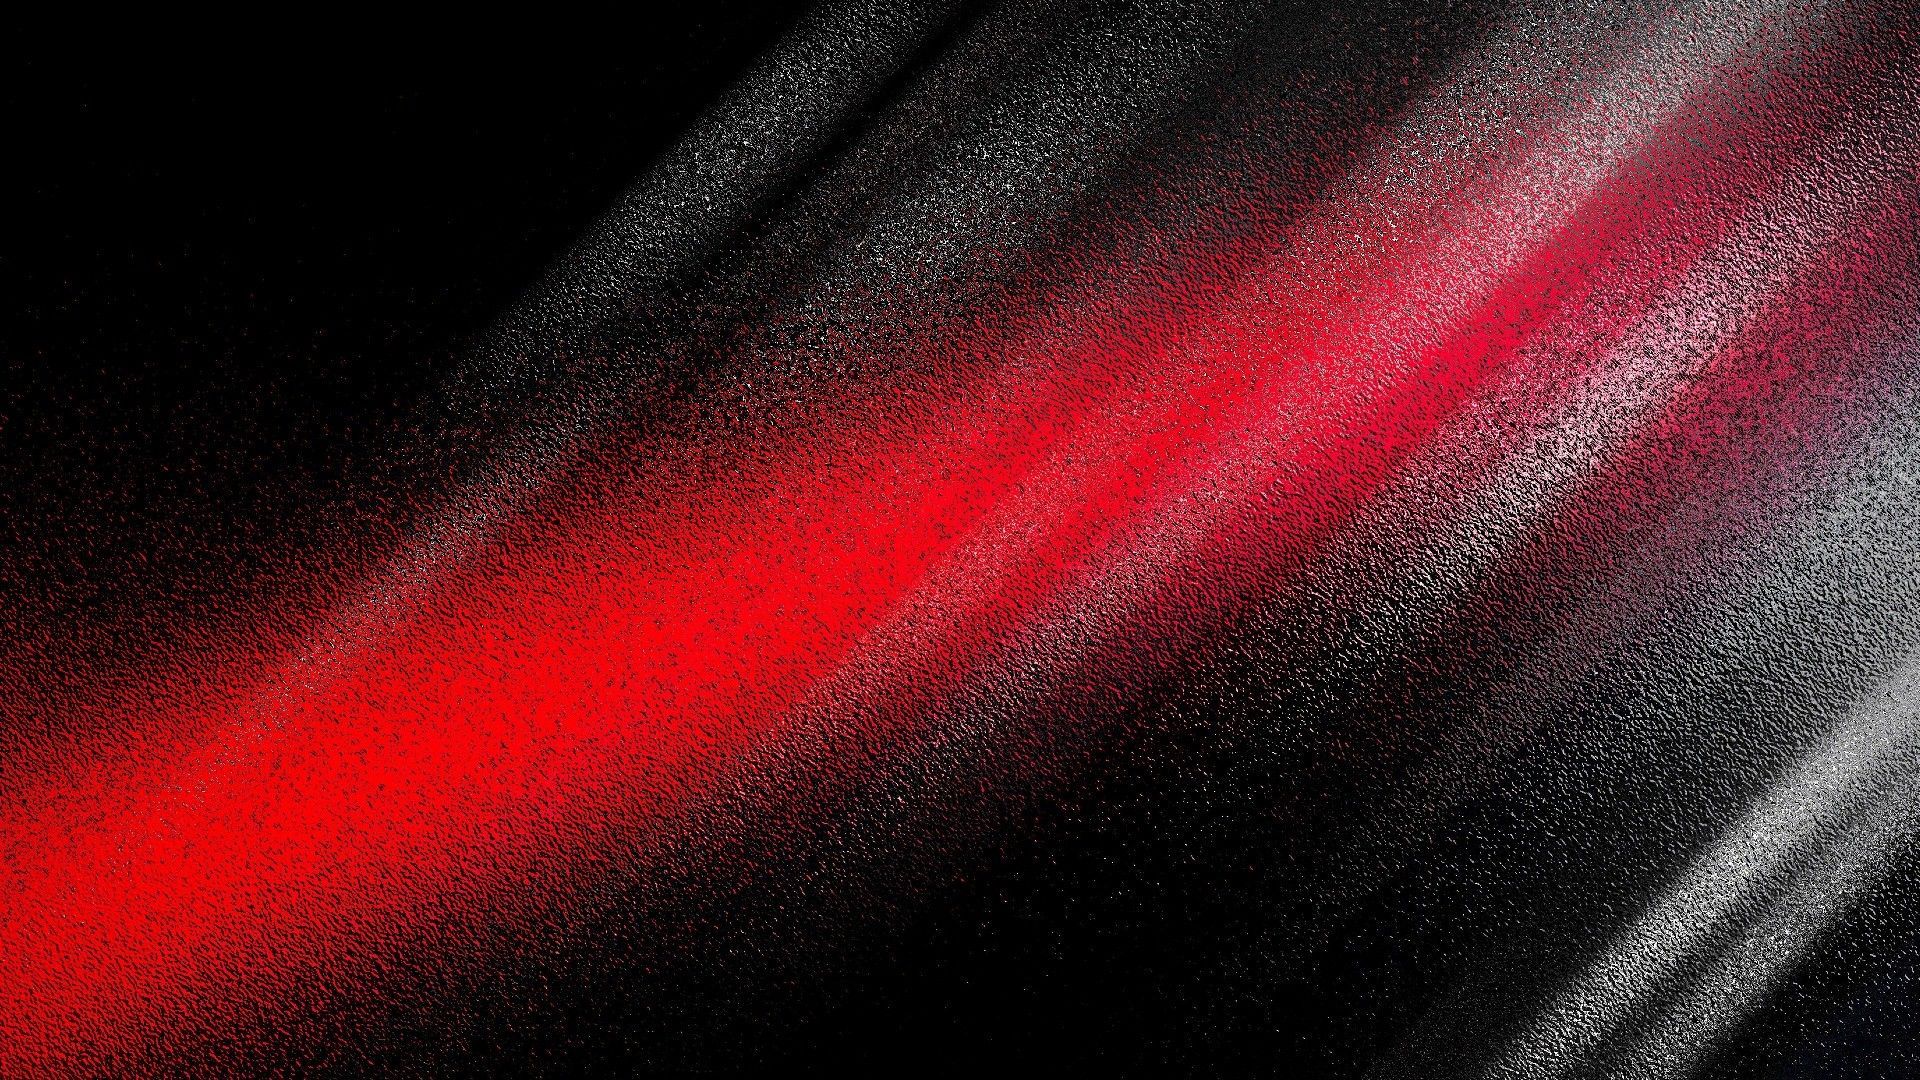 Black And Red Abstract Wallpaper 17 - [1920x1080]